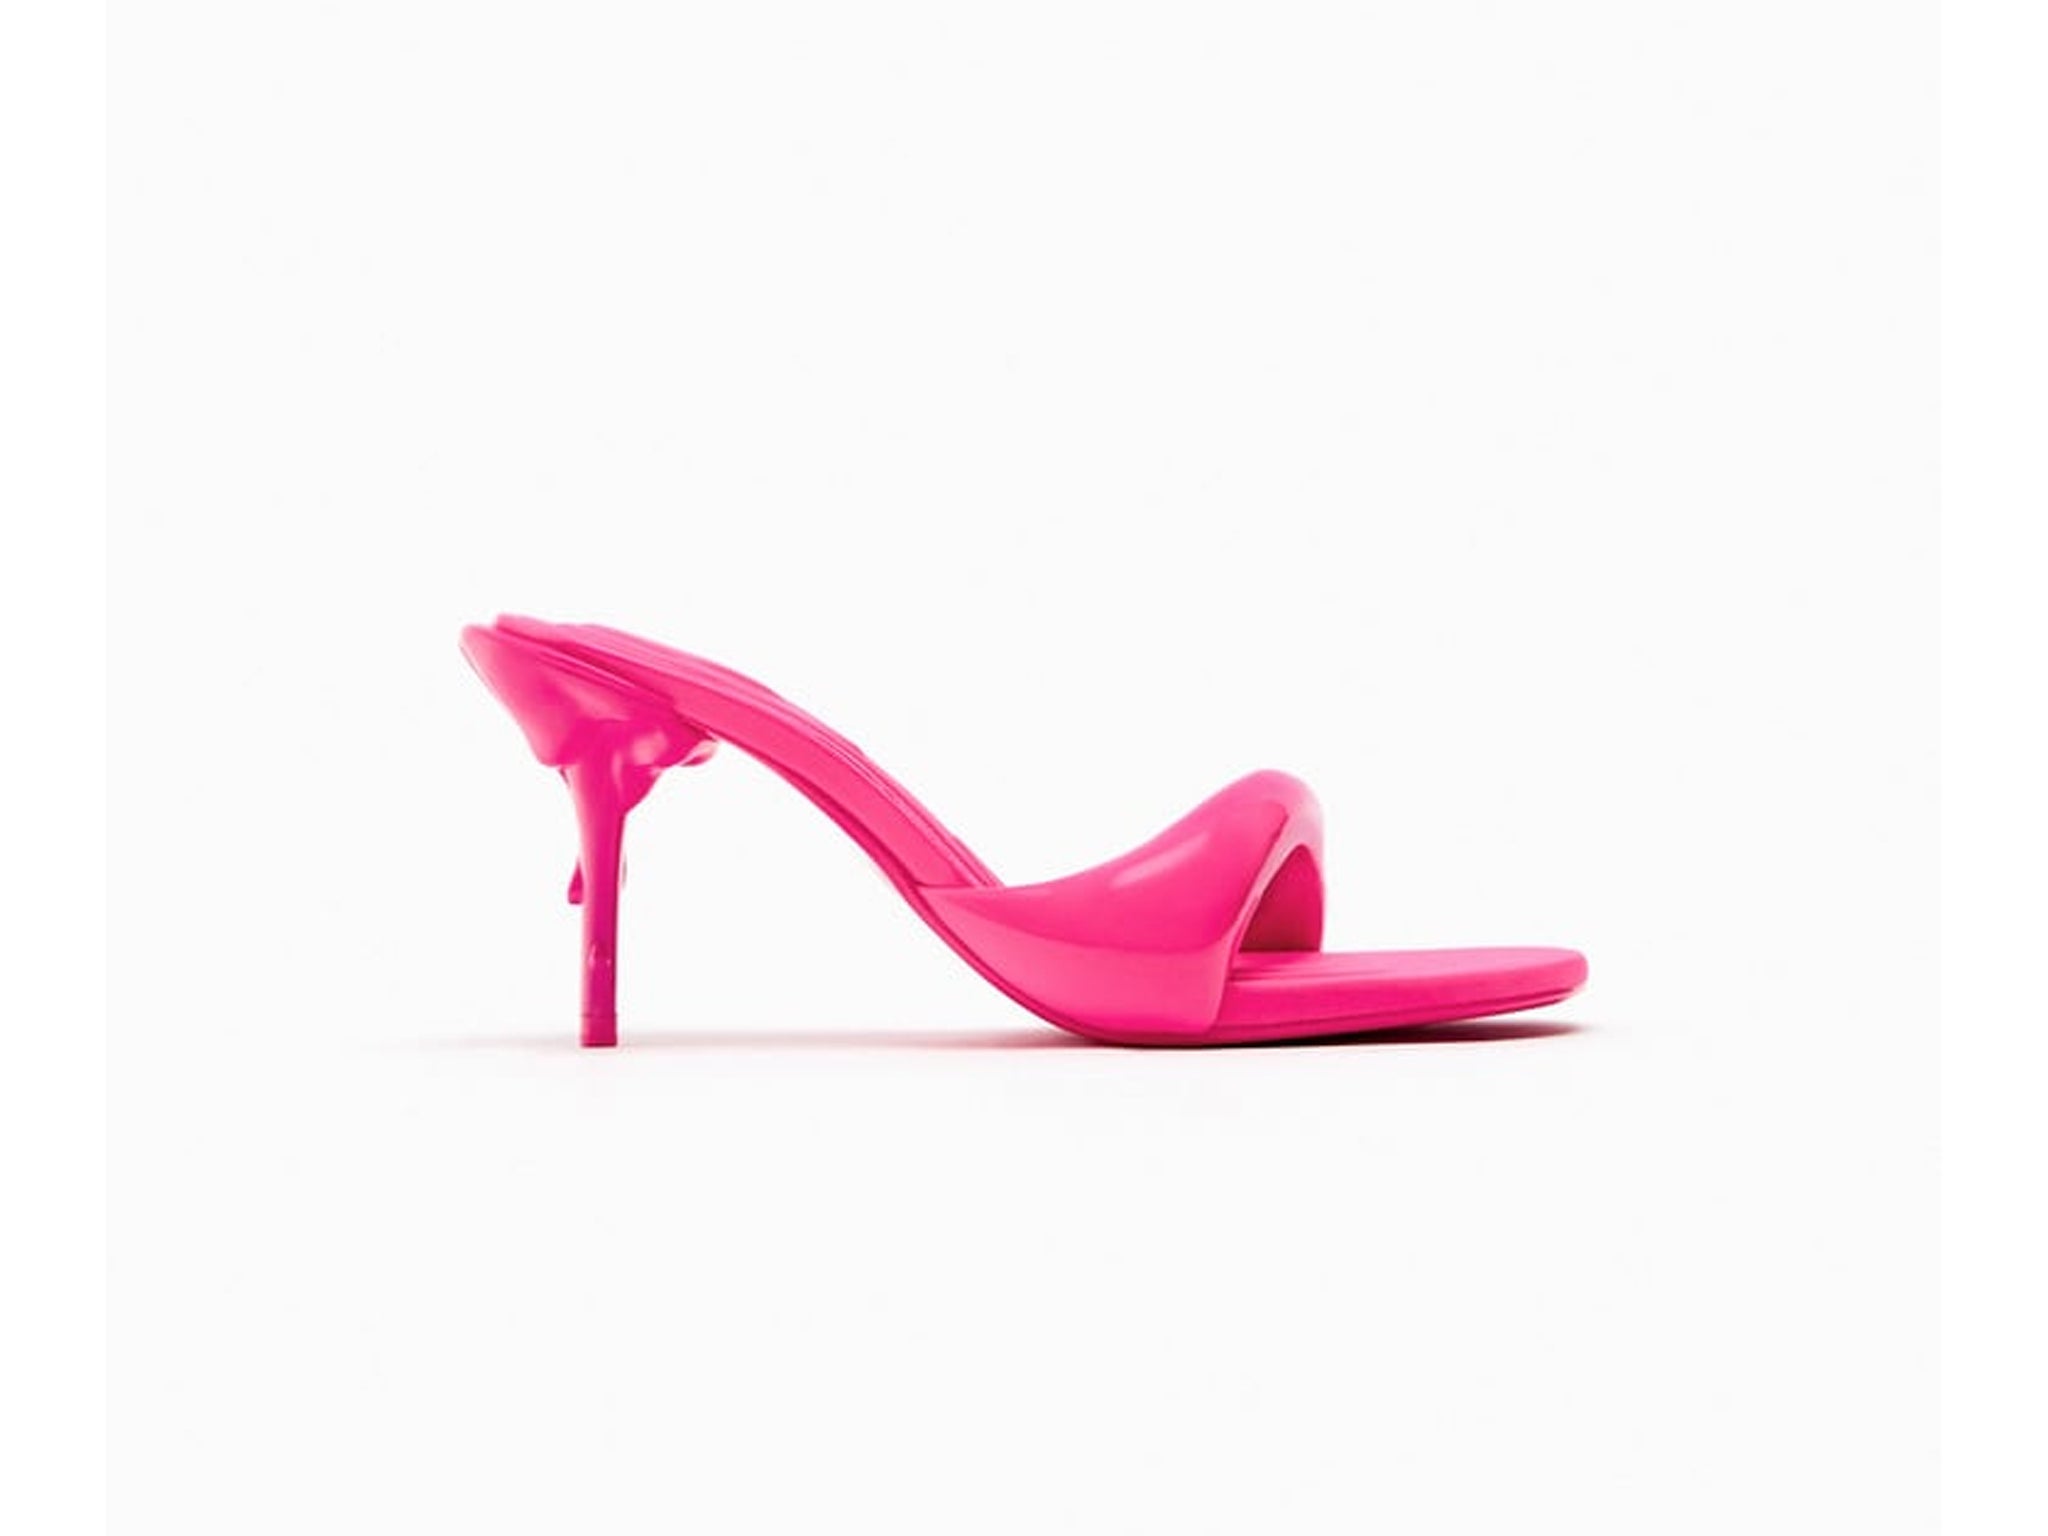 Barbie movie: Get the look with these high street pink heels